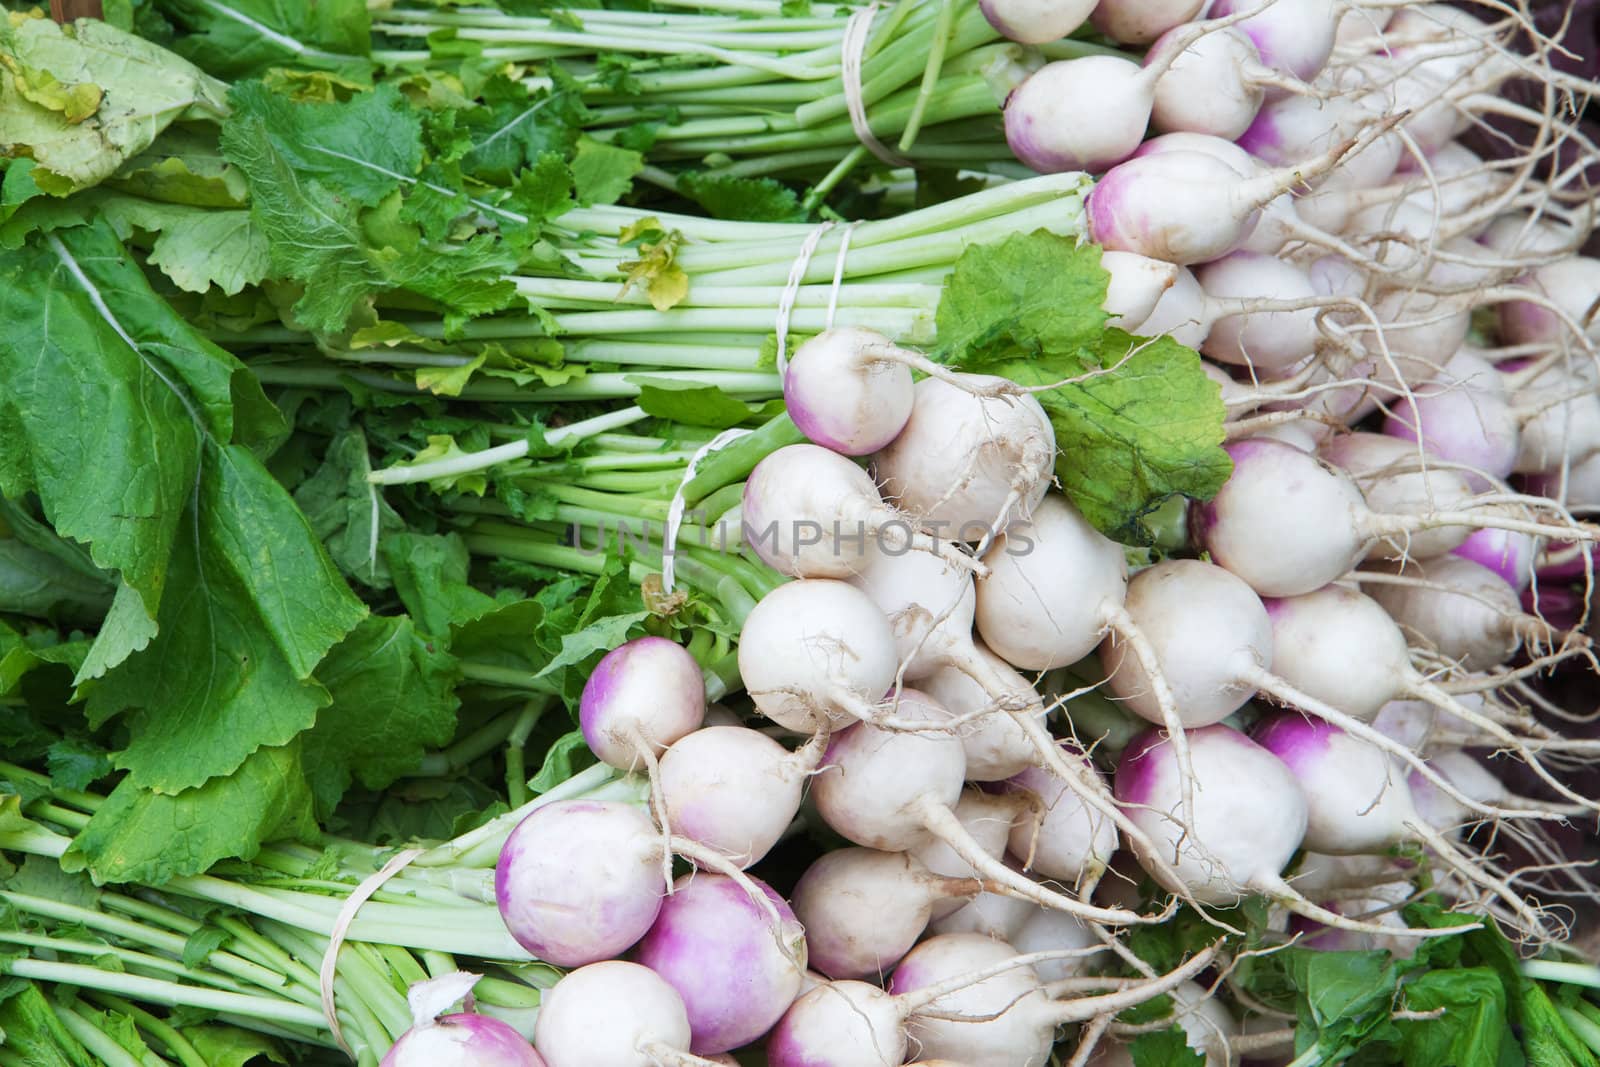 Pile of white and violet radishes at the farmers market with green leaves